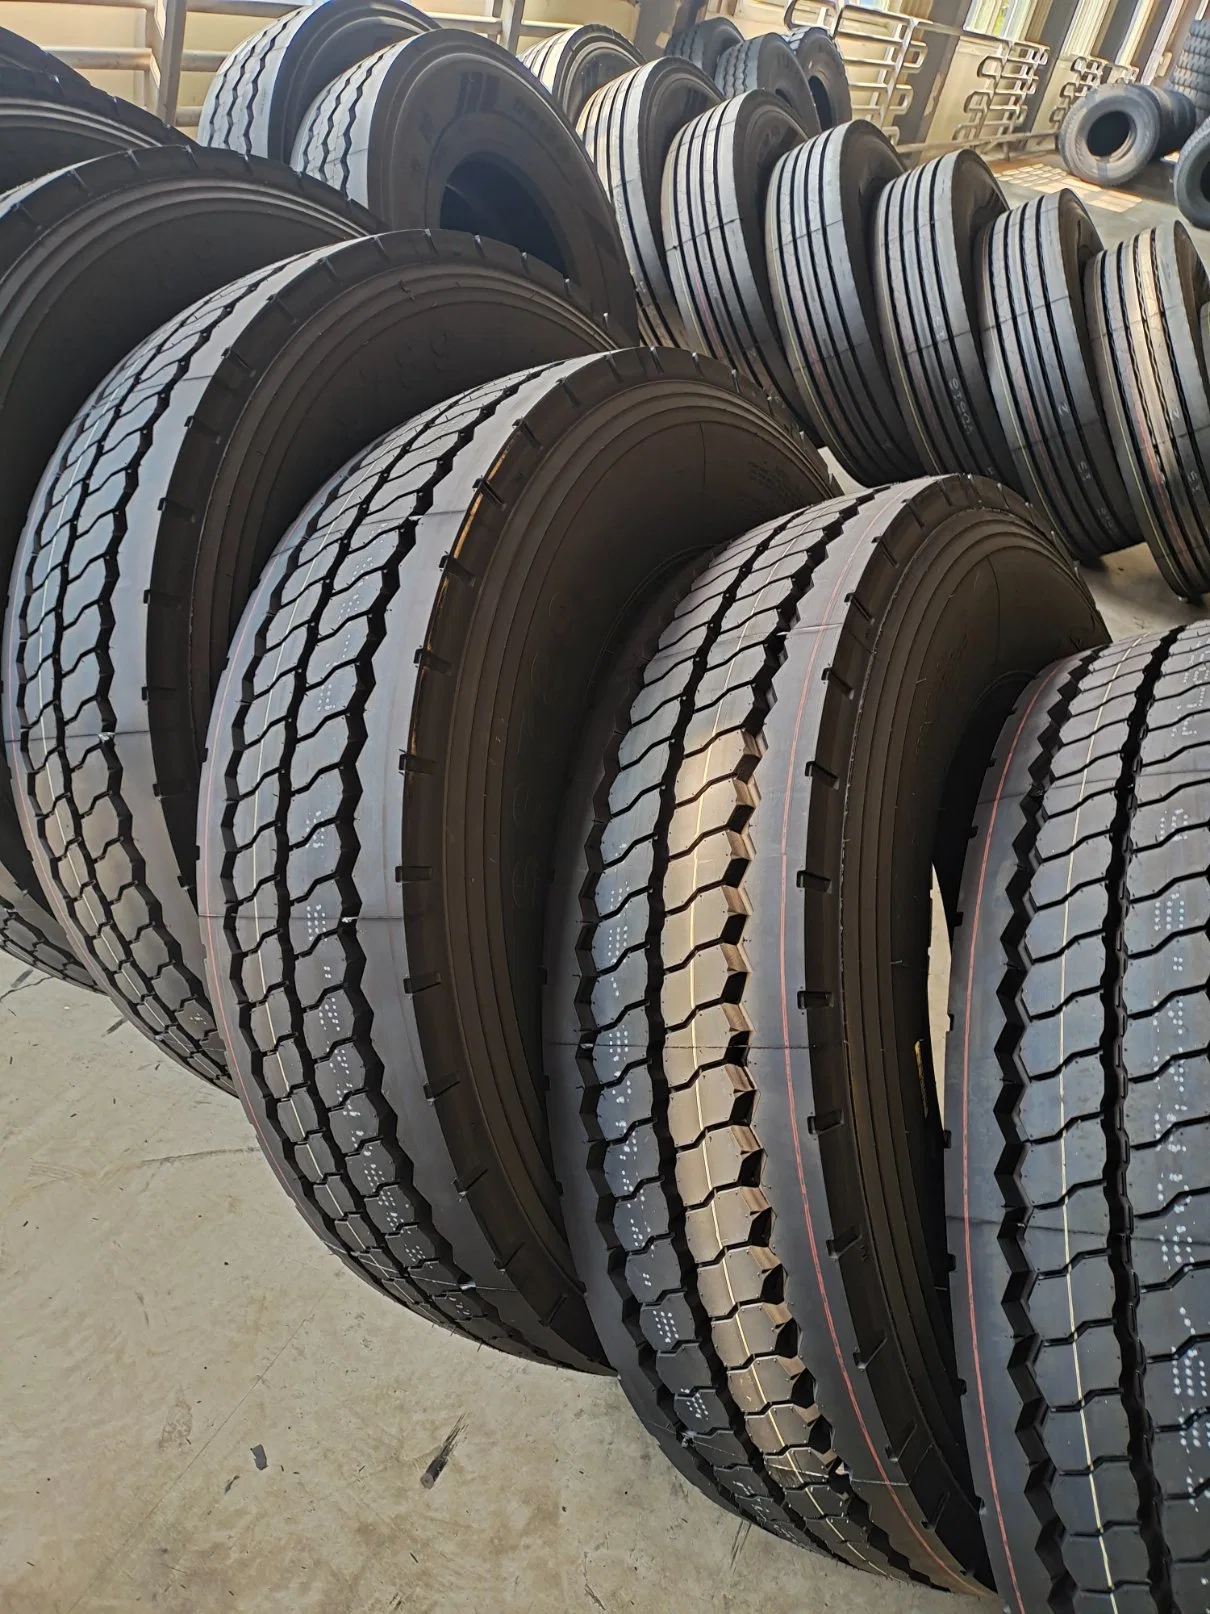 Closed Shoulders Drive Timax/Proload Truck Tires12002420 12r20 Tire Roadone 1100r20 Truck Tyres 12r225 Tires